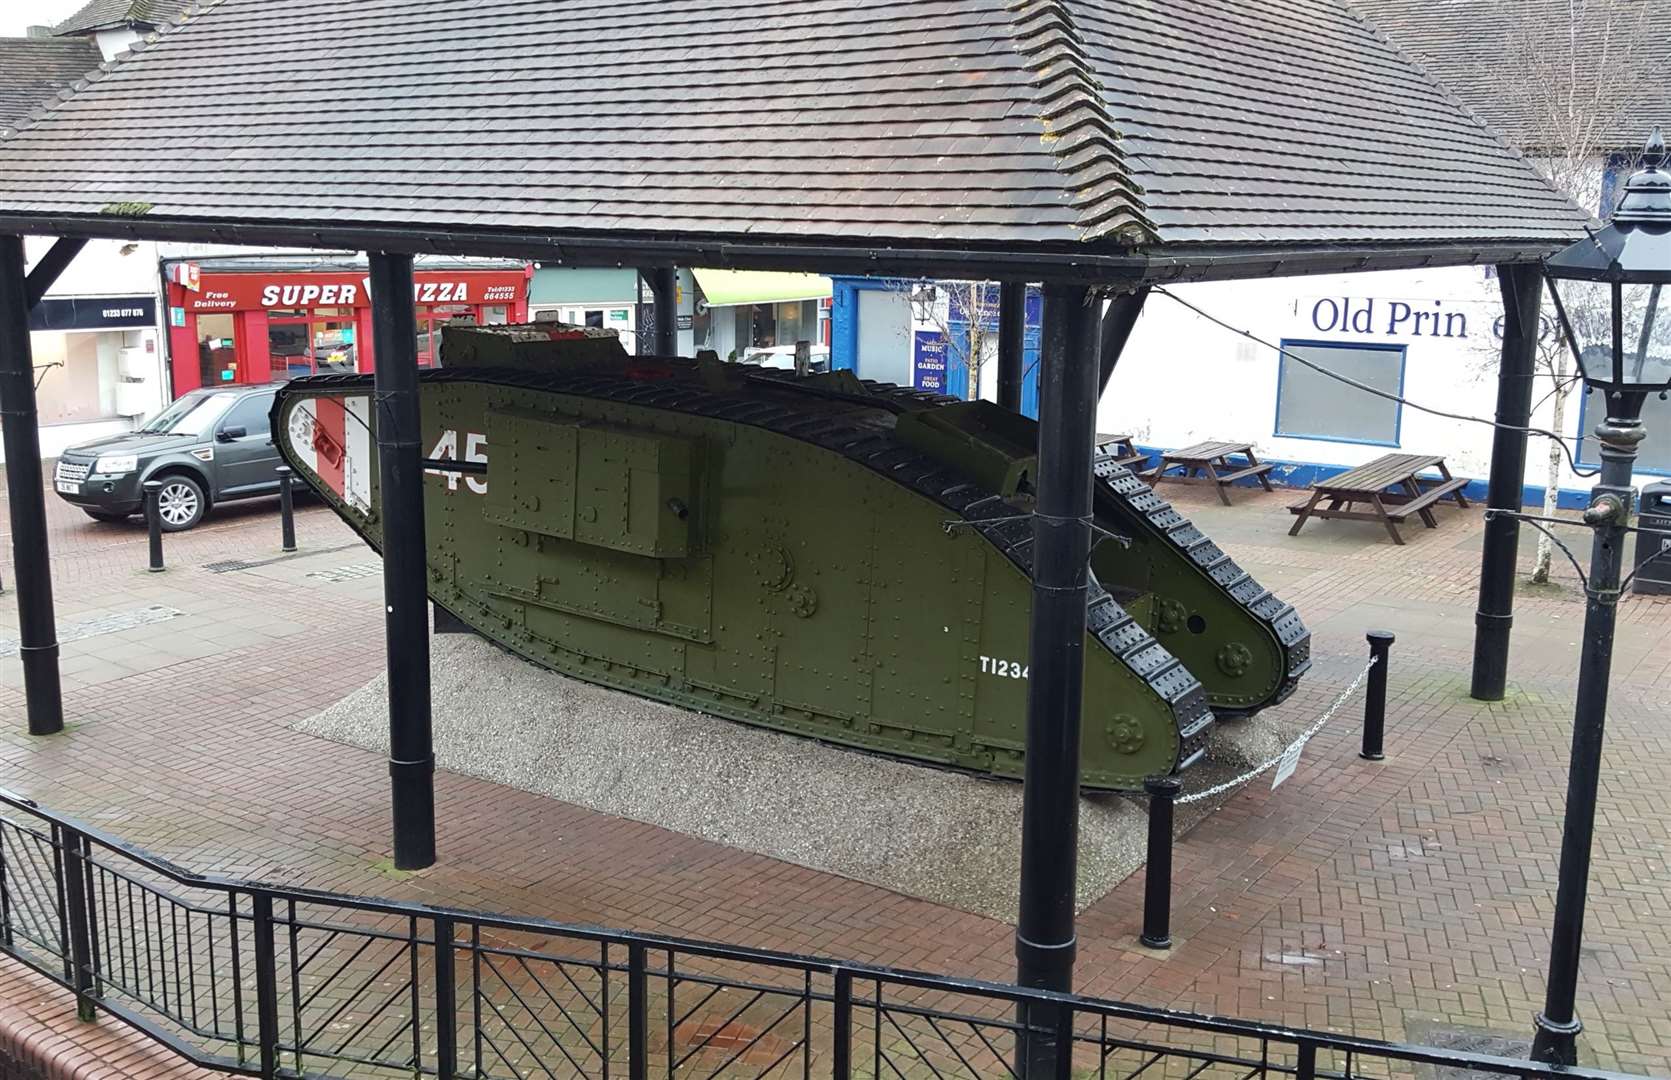 The tank resides under a specially-made shelter, however this is not enough to maintain its condition